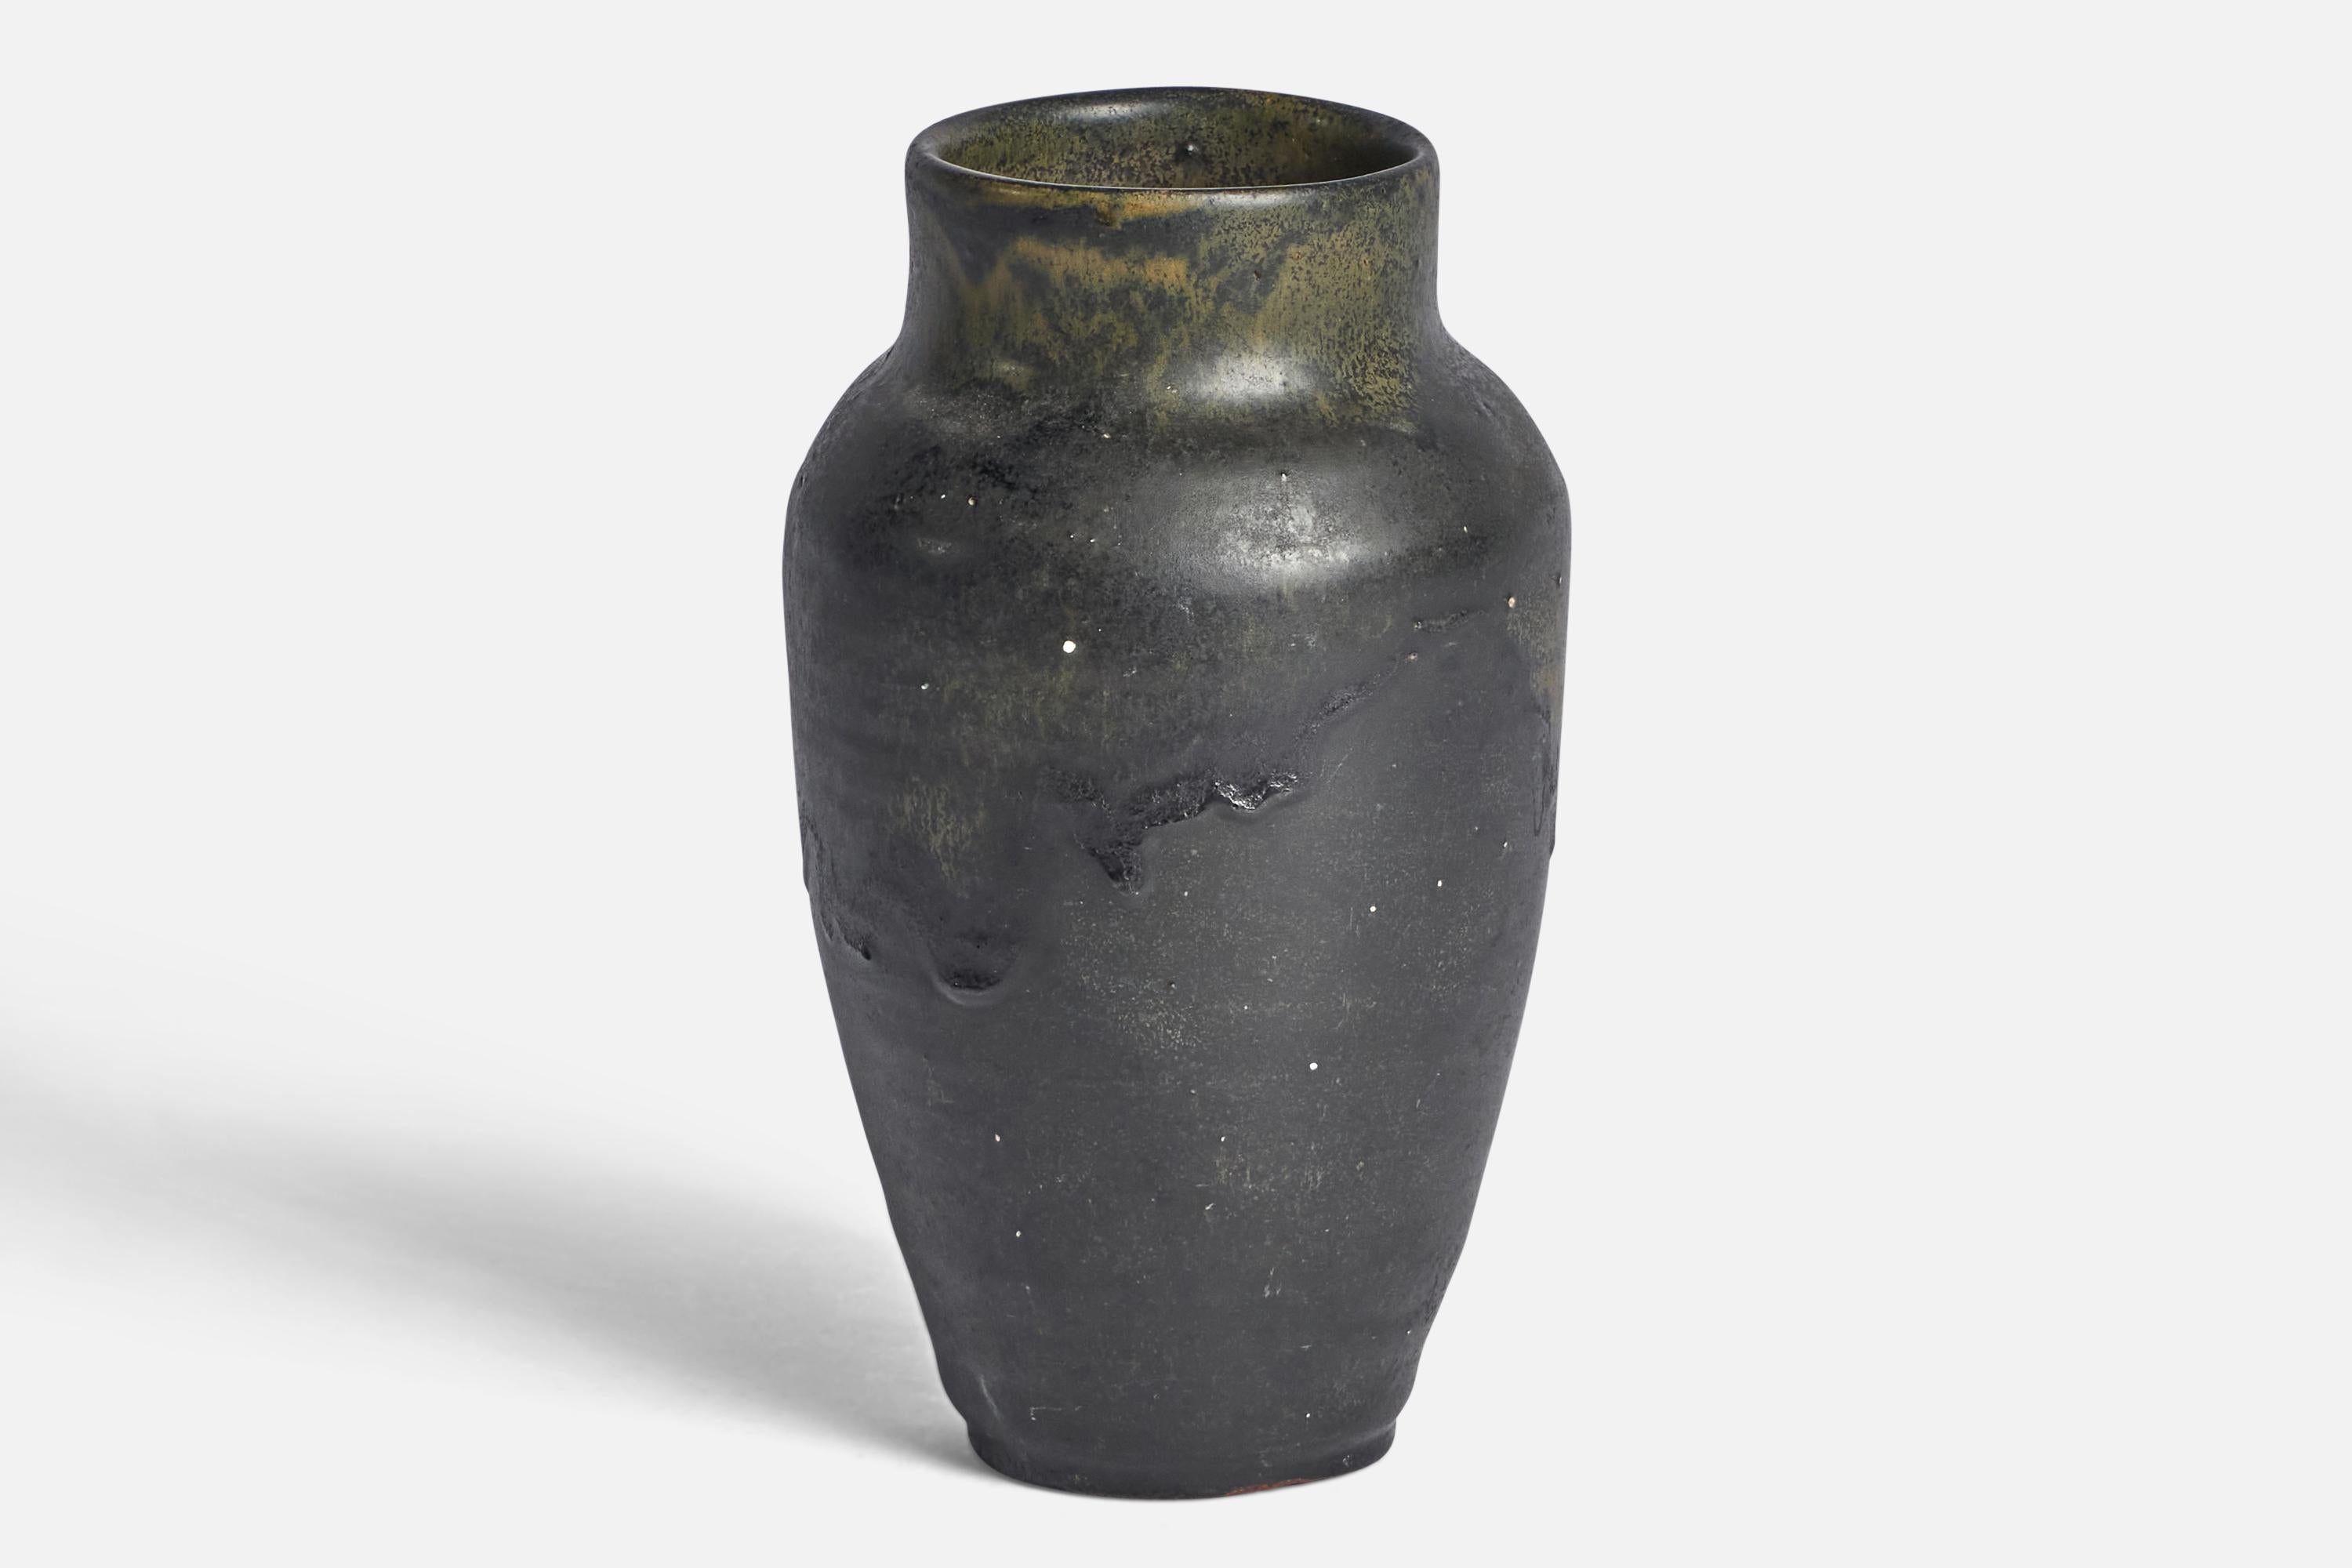 A grey and green-glazed stoneware vase designed and produced by Agne Aronsson, Sweden, c. 1970s.